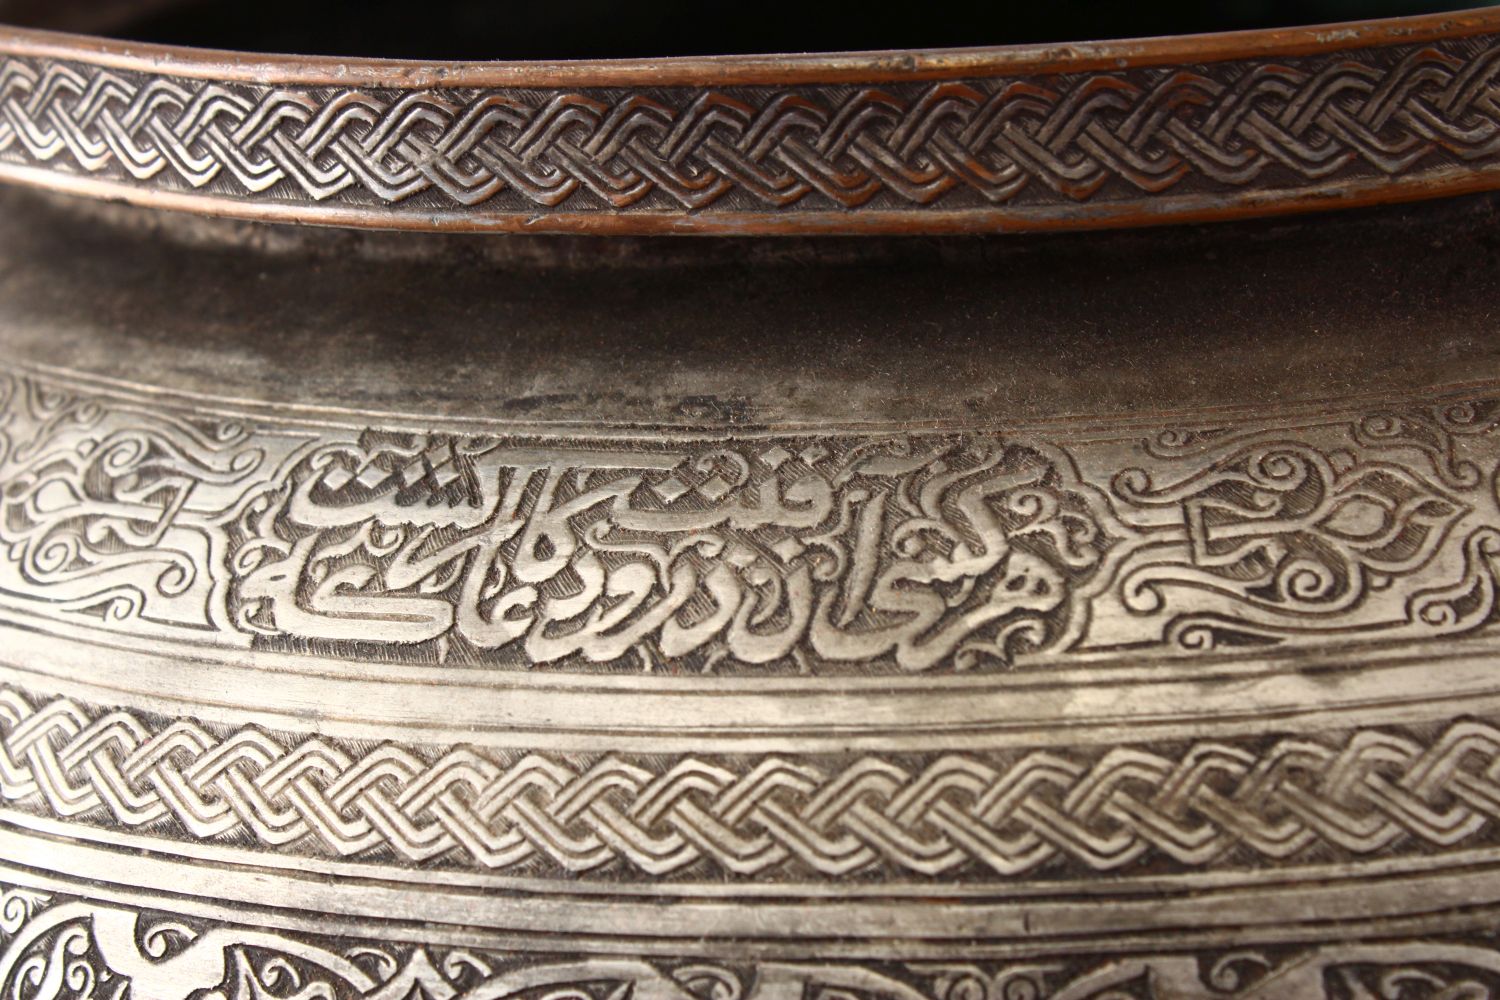 A LARGE ISLAMIC TINNED BRONZE SAFAVID CALLIGRAPHIC BOWL, the body with chased formal intertwined - Image 11 of 13